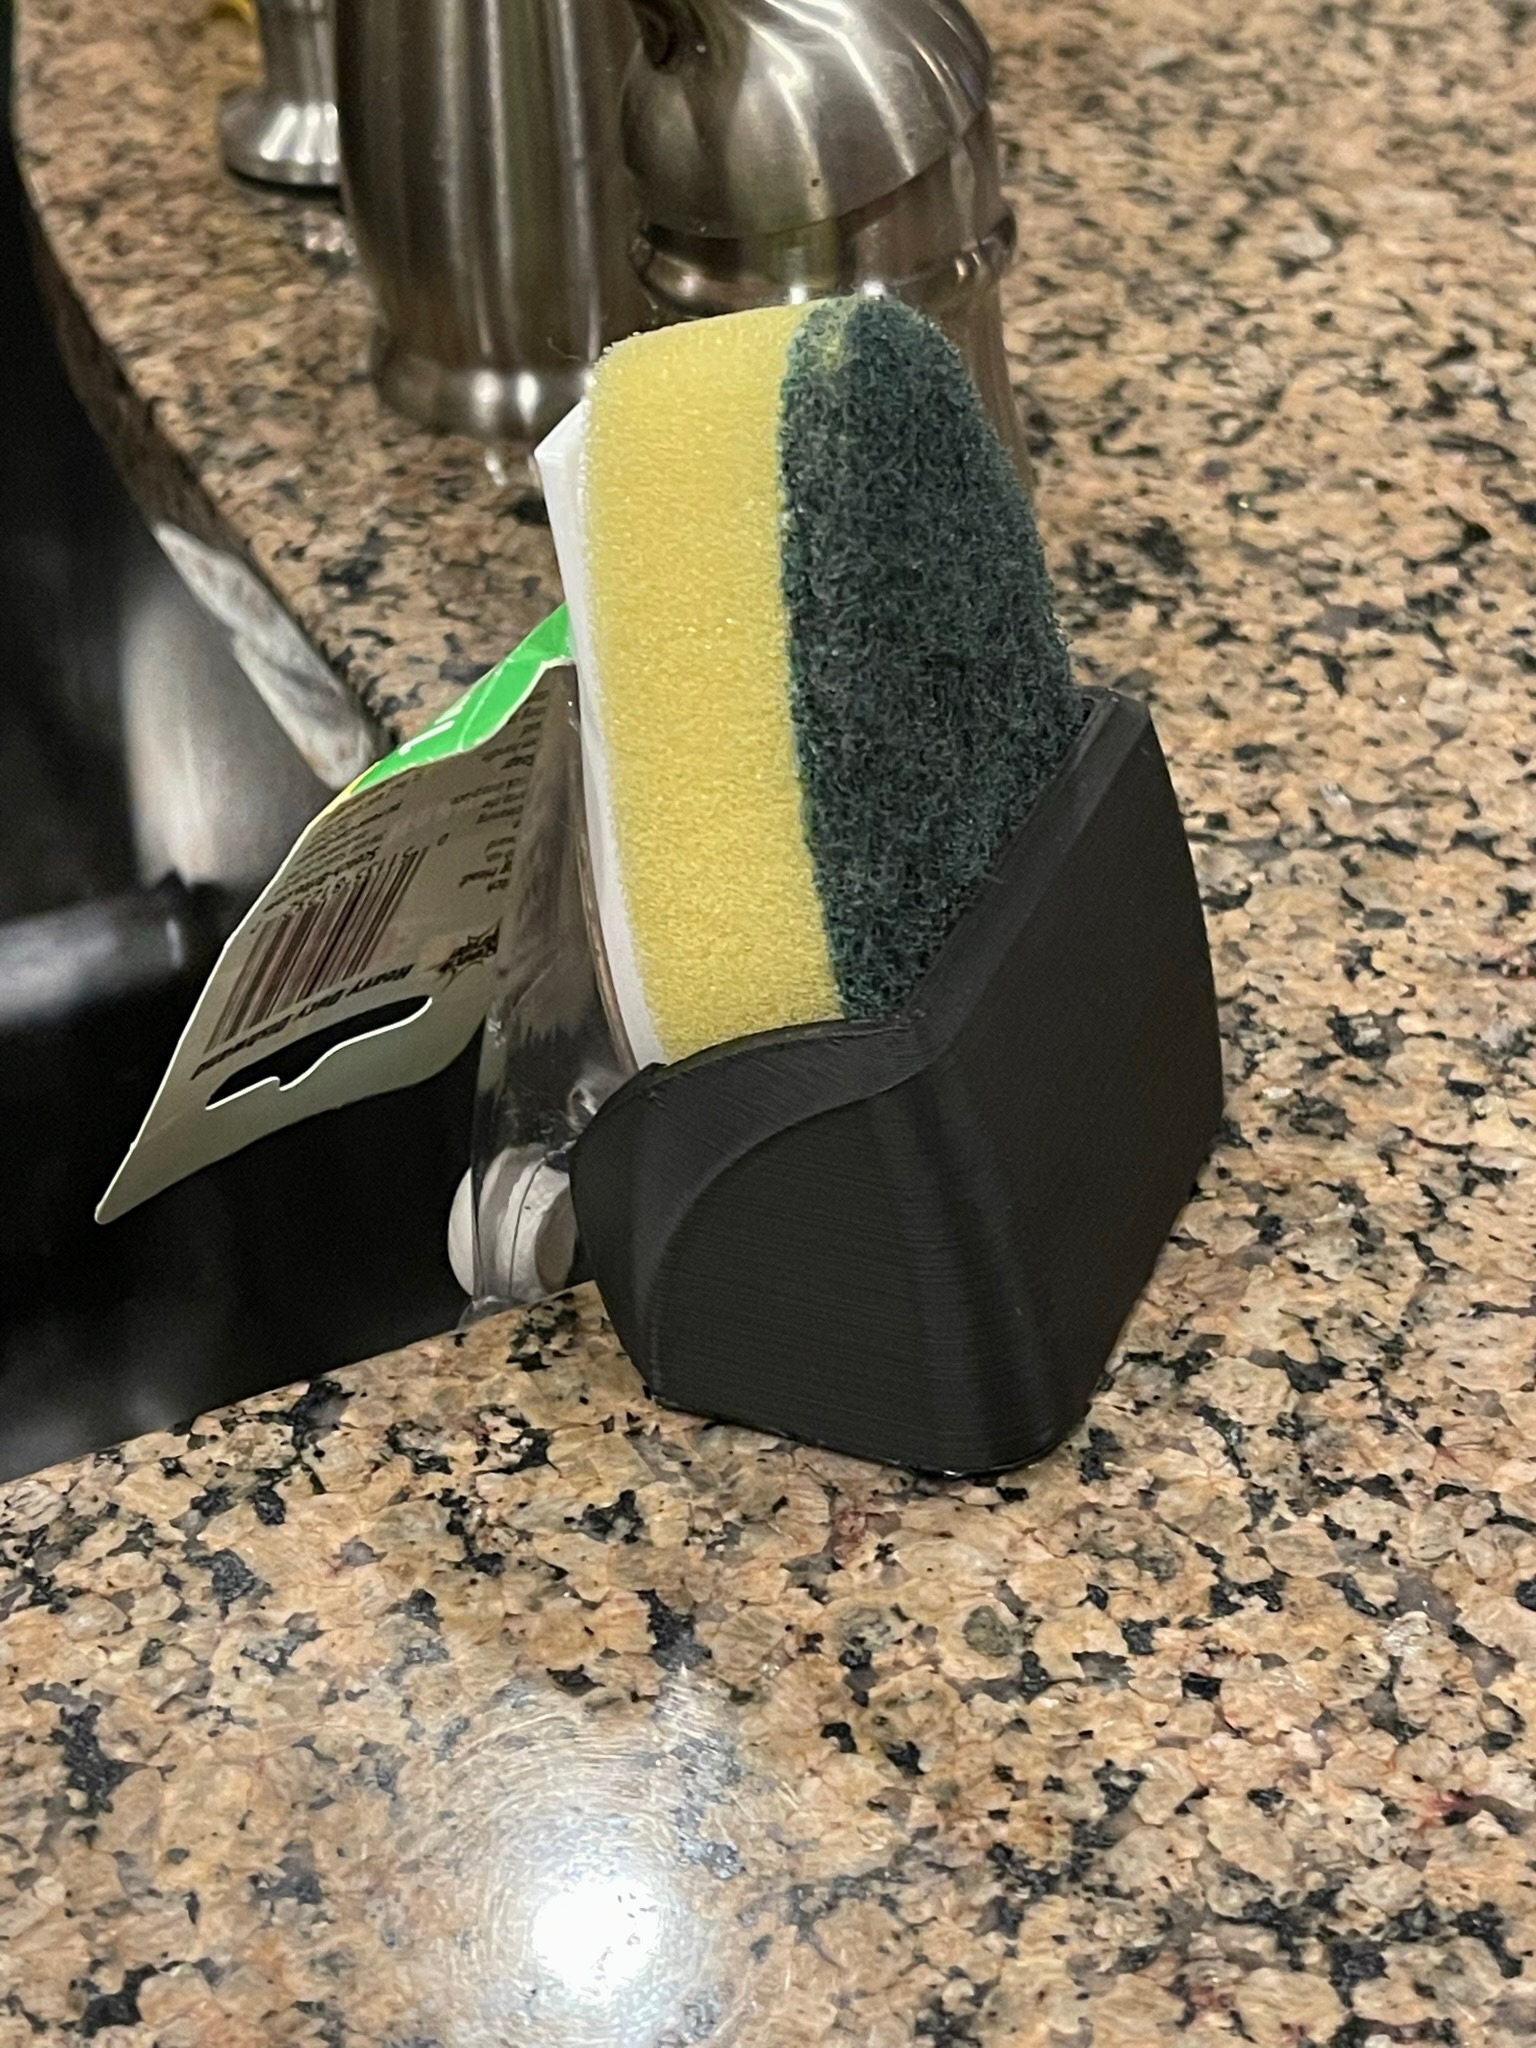 Dish Wand Holder / Caddy, Keeps Wand Clean and Dry -  Singapore